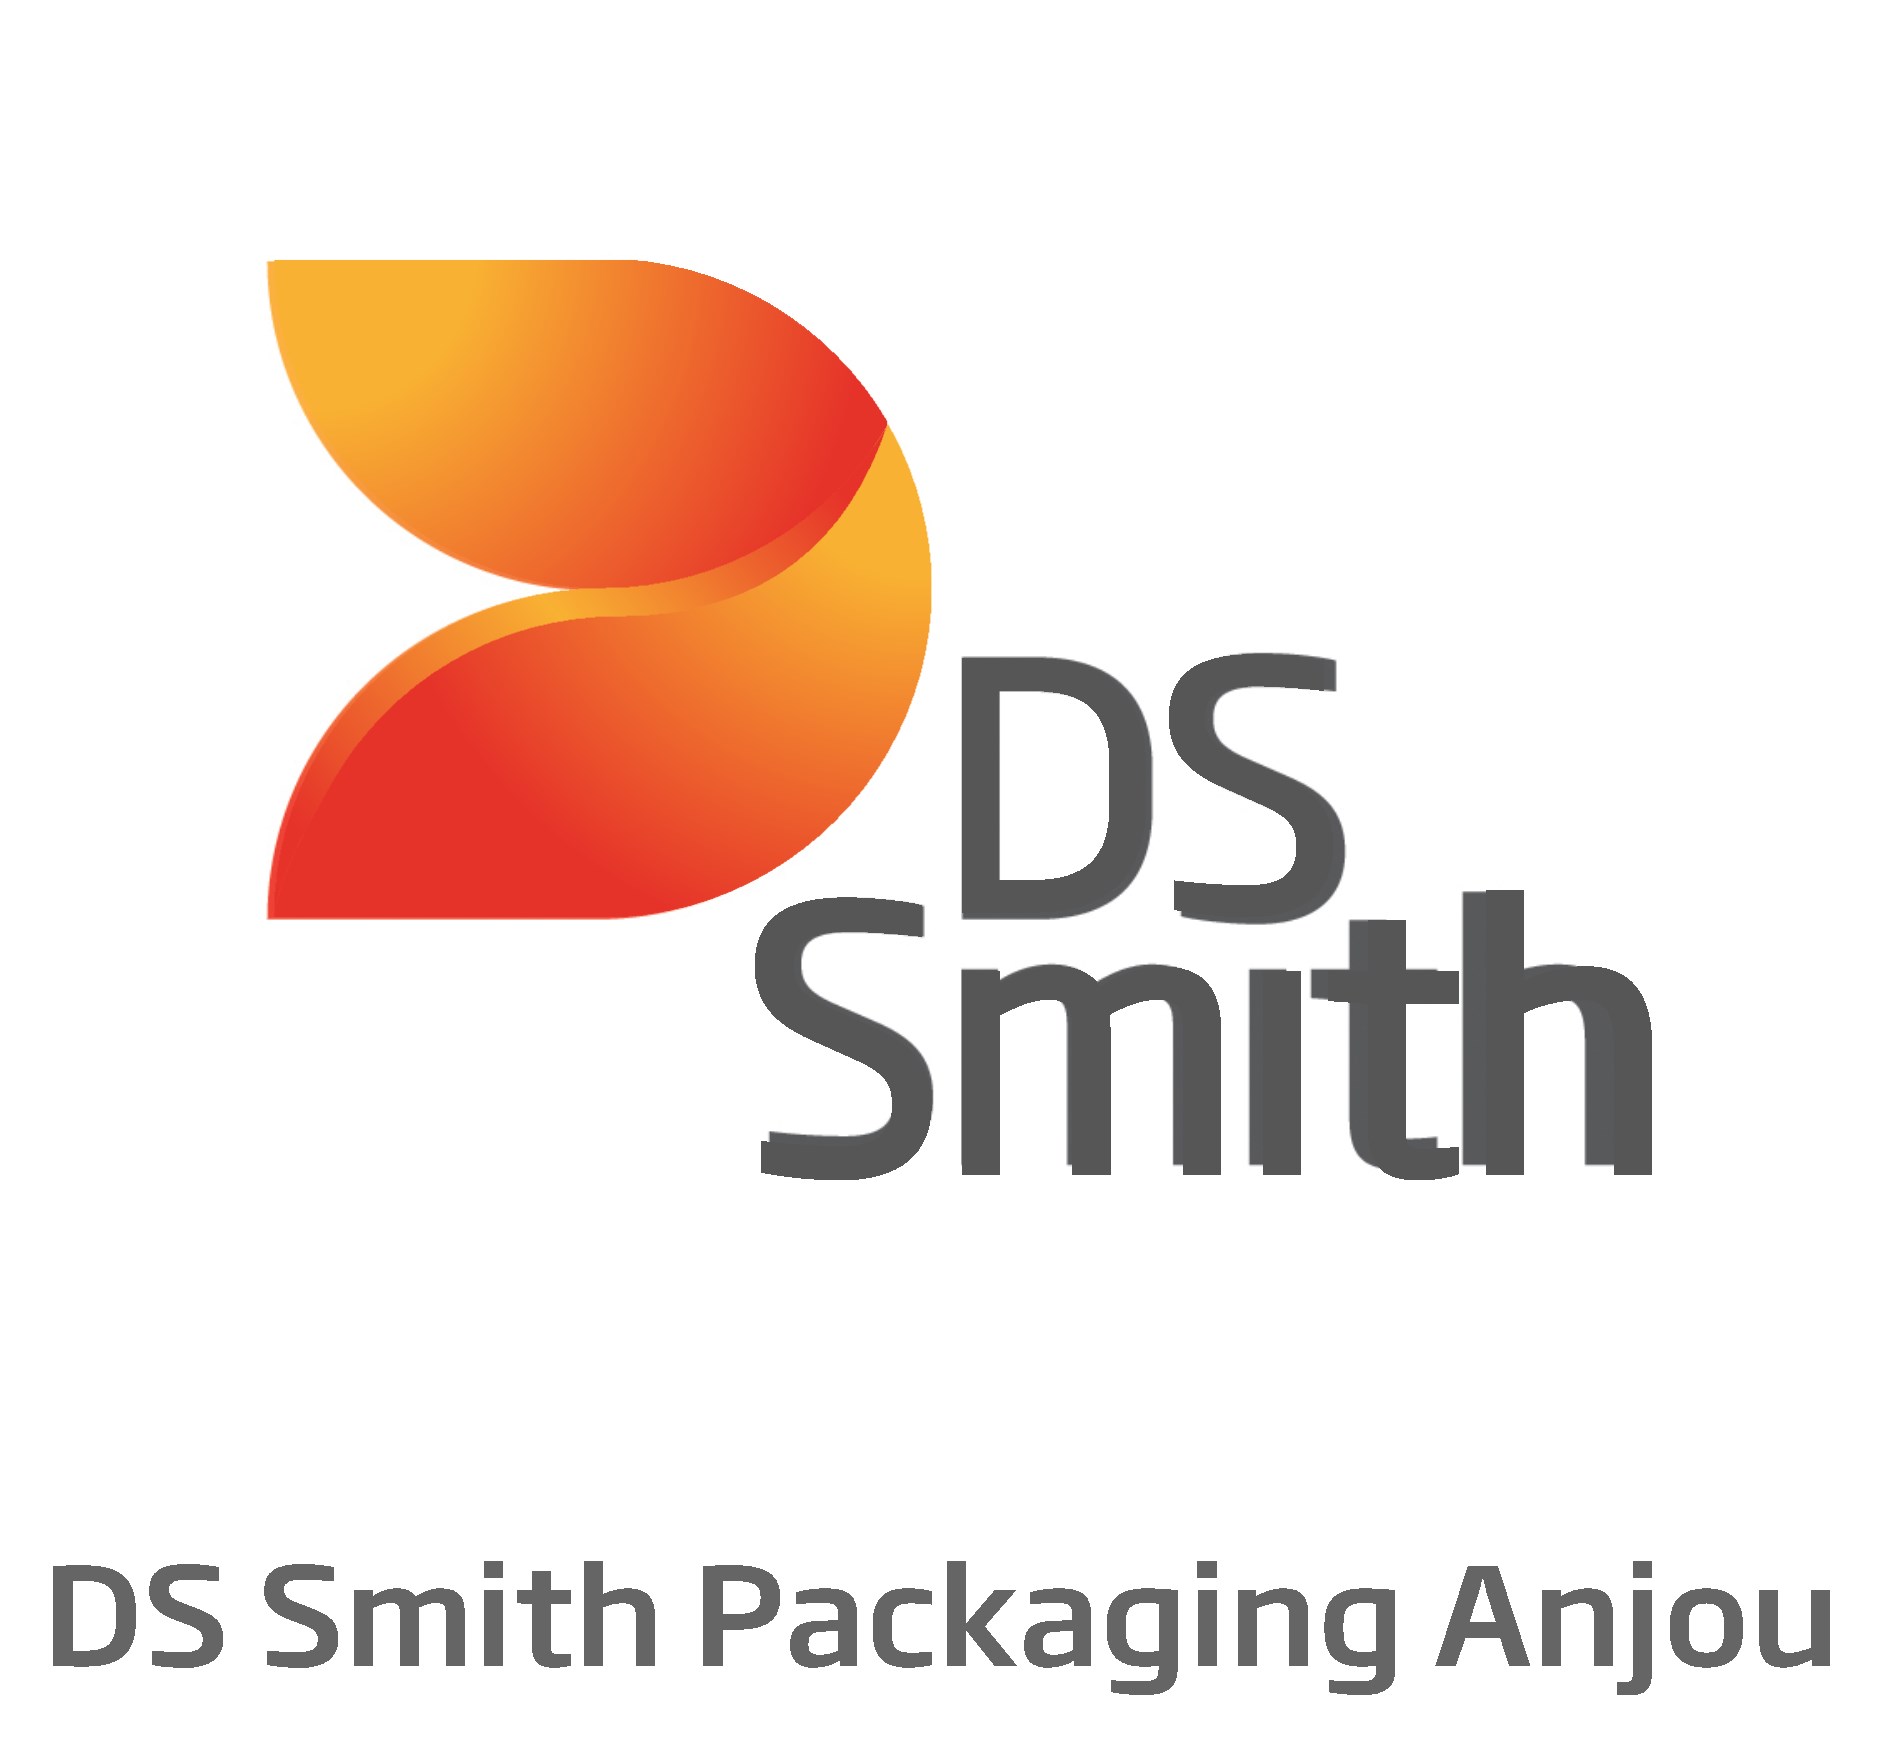 Ds smith packaging anjou 2